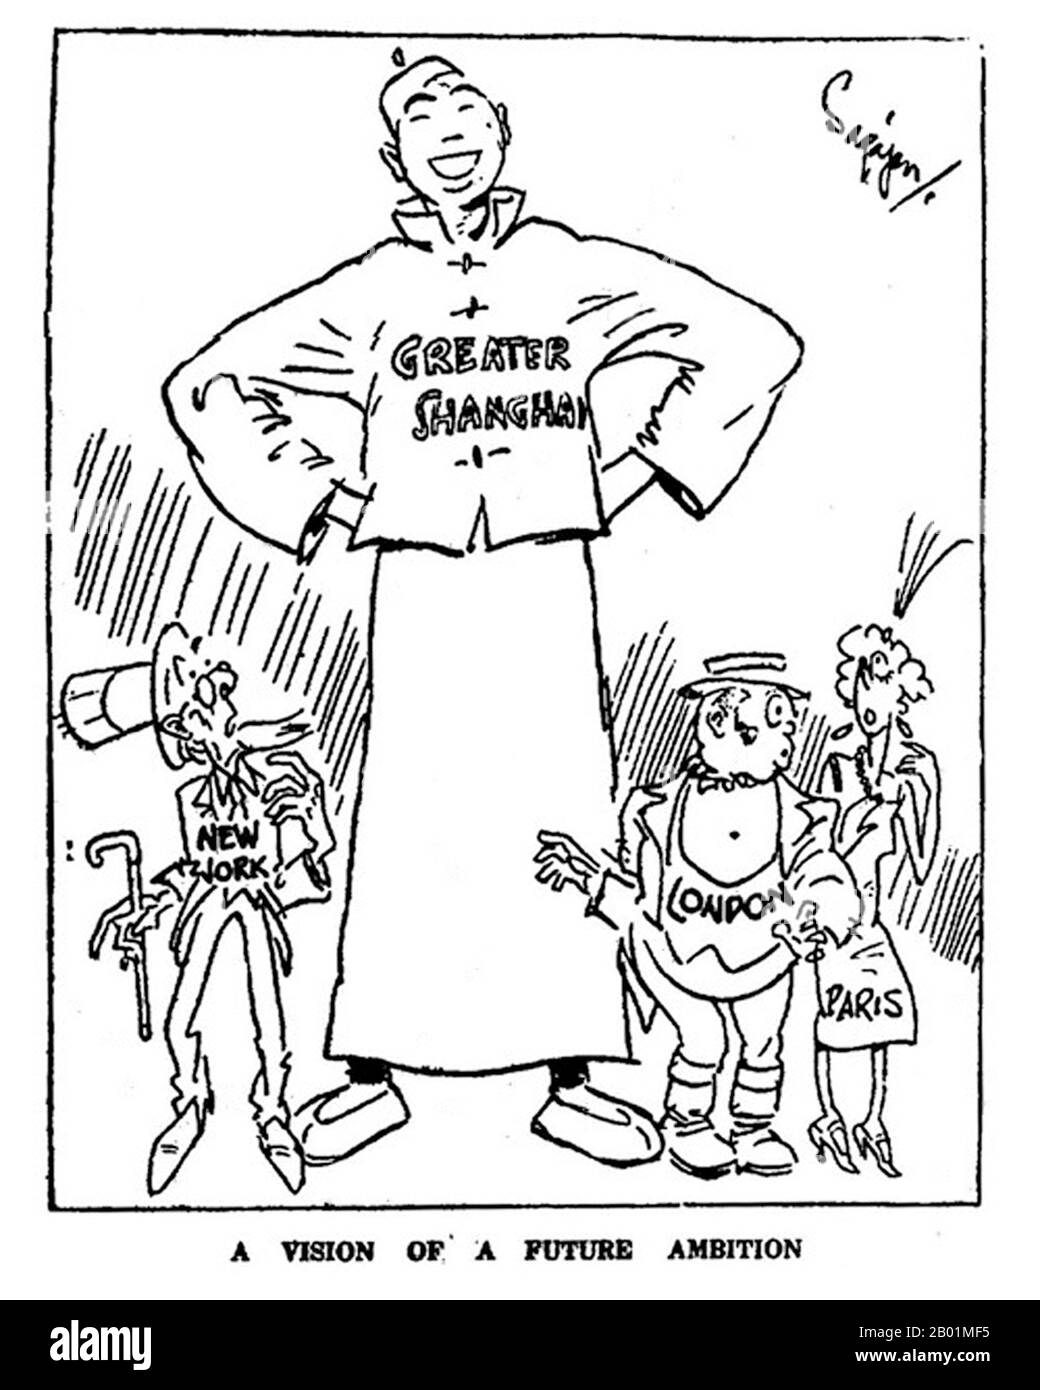 China: Greater Shanghai, 'a vision of future ambition'. A cartoon by 'Sapajou' Georgii Sapojnikoff (1893-1949), White Russian exile and cartoonist at the North China Daily News, Shanghai, 1925-1940.  Sapajou was the artistic nom de plume of Georgii Avksentievich Sapojnikoff, one-time Lieutenant of the Russian Imperial Army. He was a graduate of the Aleksandrovskoe Military School in Moscow, and saw action in World War I, in which he was gravely wounded. As a result of his wounds, which left him with a pronounced limp for the rest of his life, he was invalided out of the army. Stock Photo